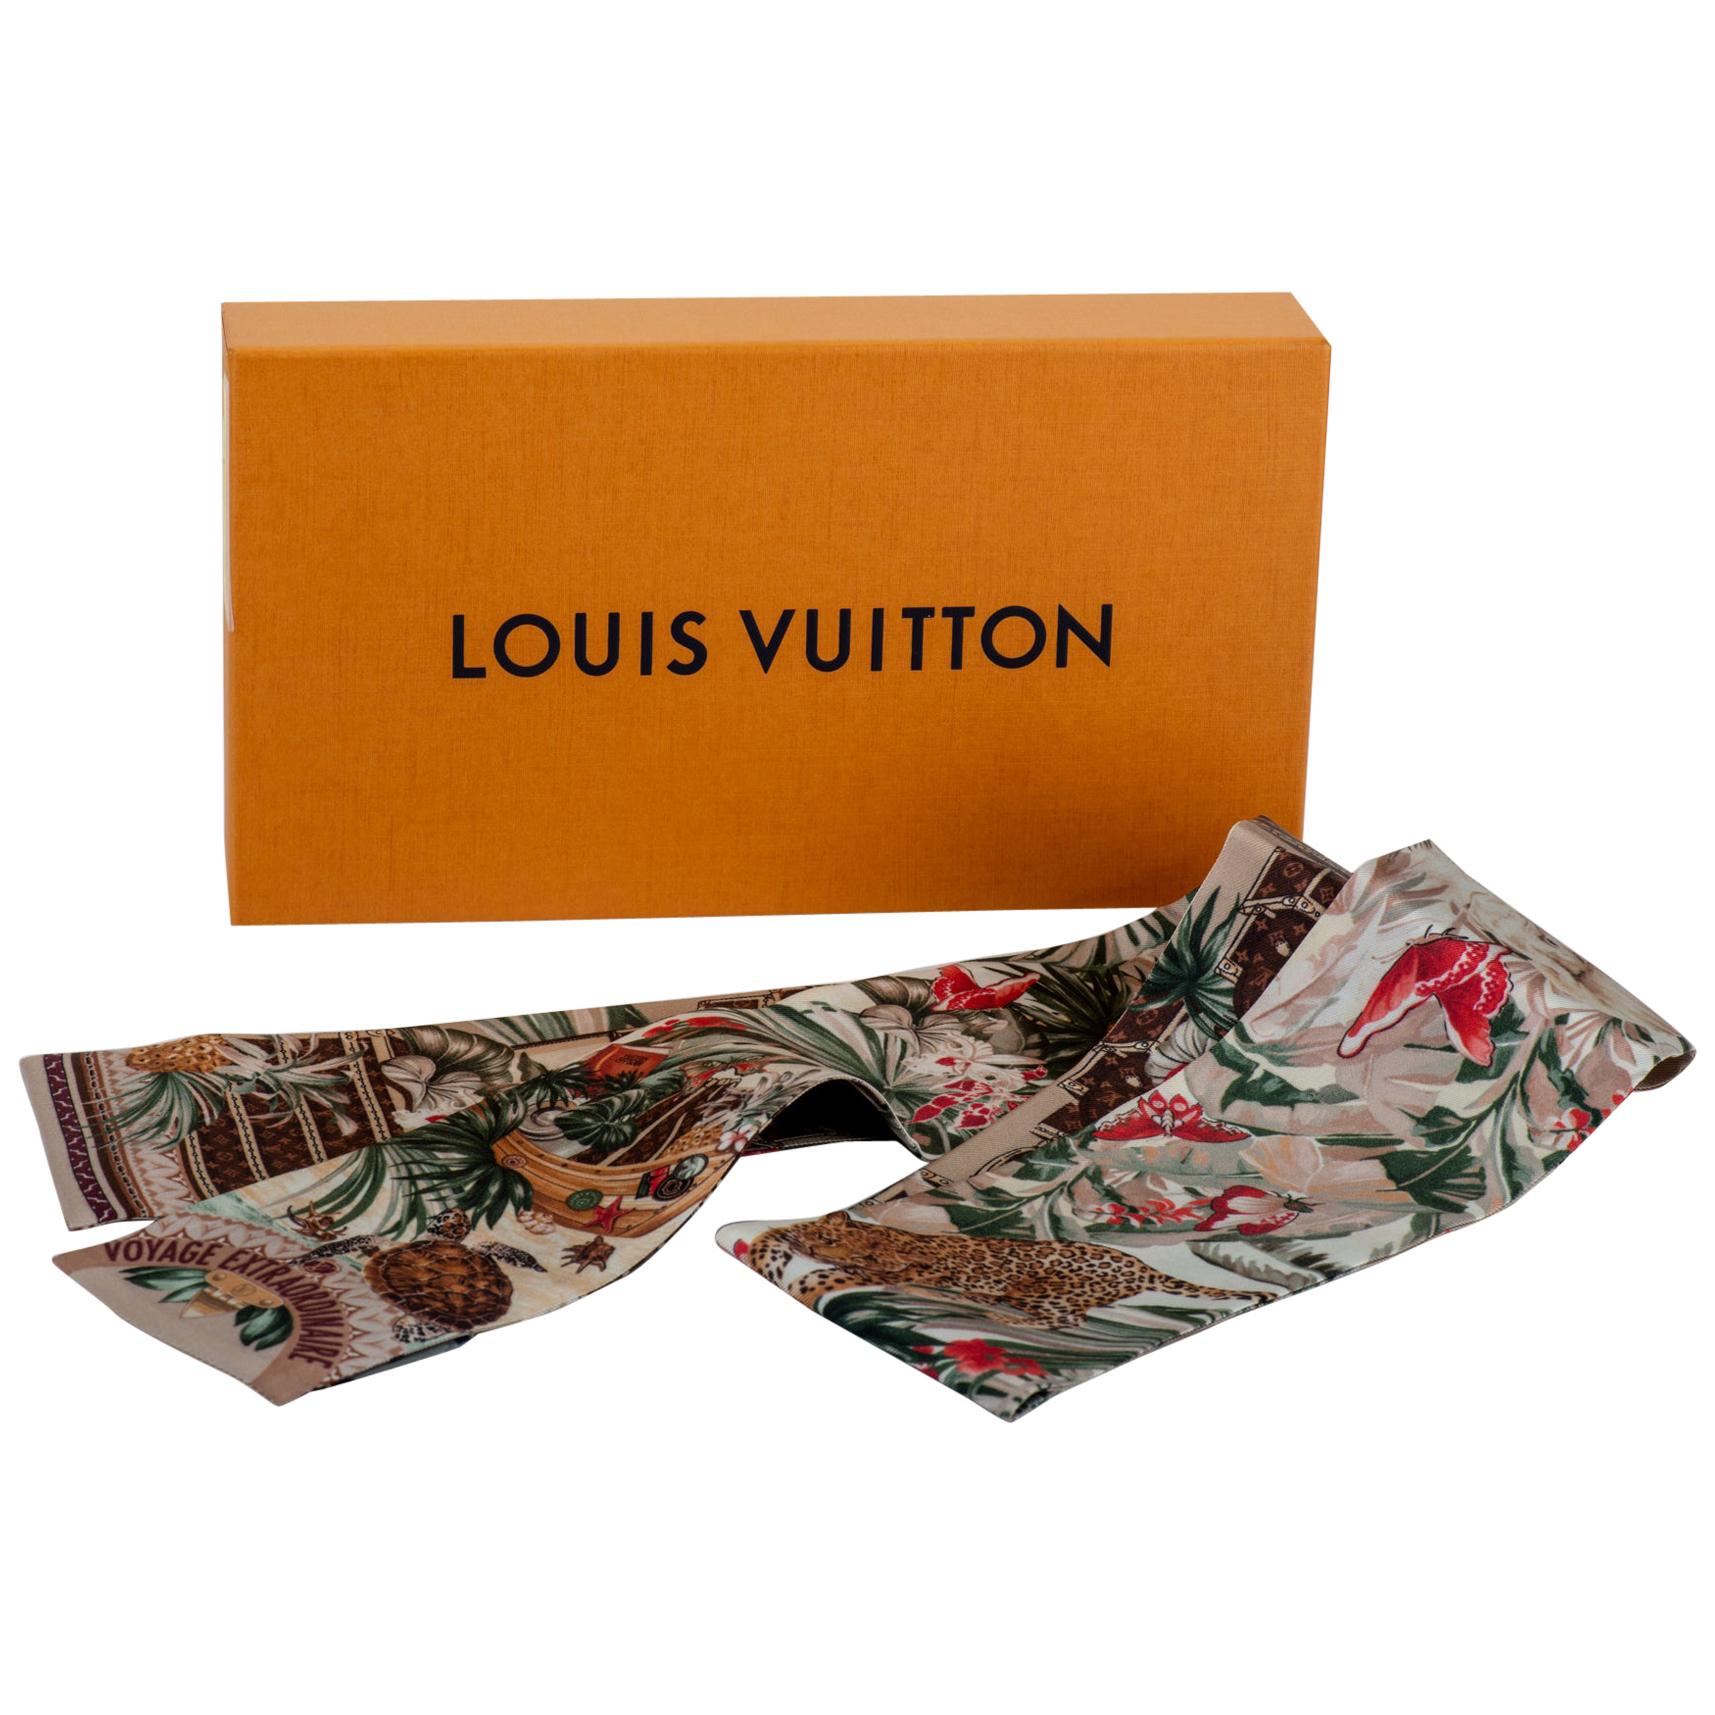 New in the box Louis Vuitton Maxi Twill Voyage Limited Edition Scarf